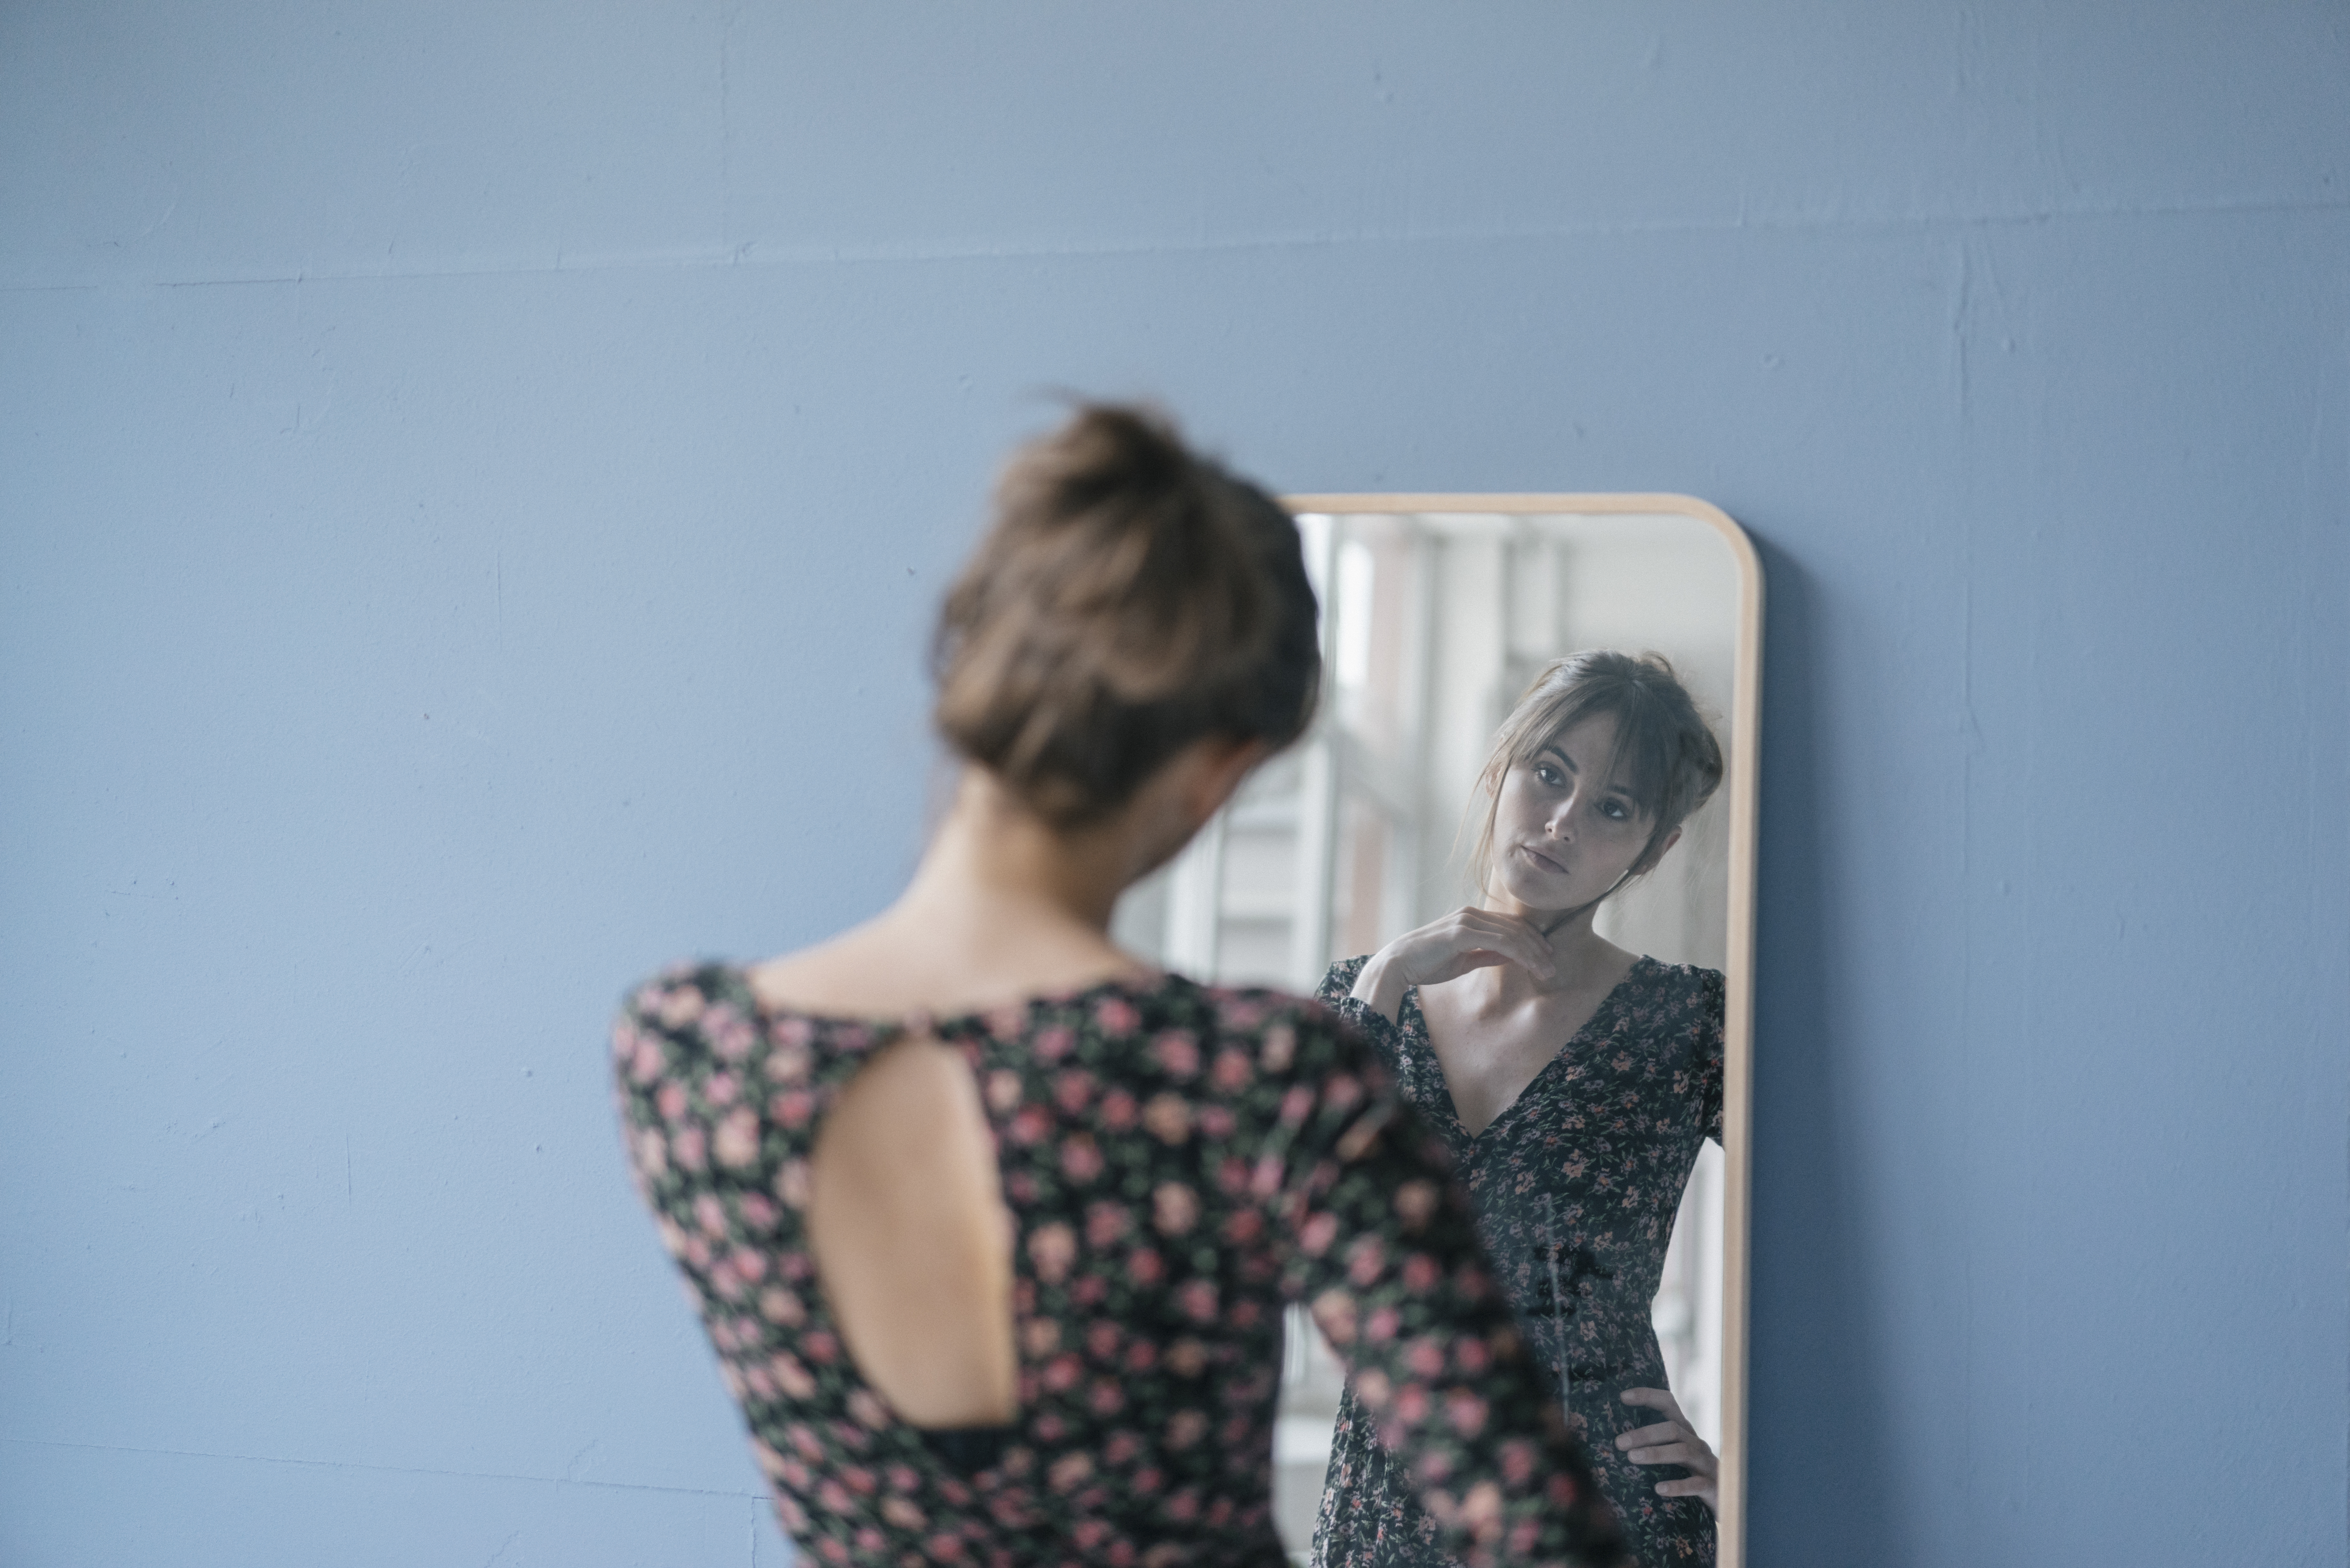 A woman looking at herself in the mirror. | Source: Getty Images